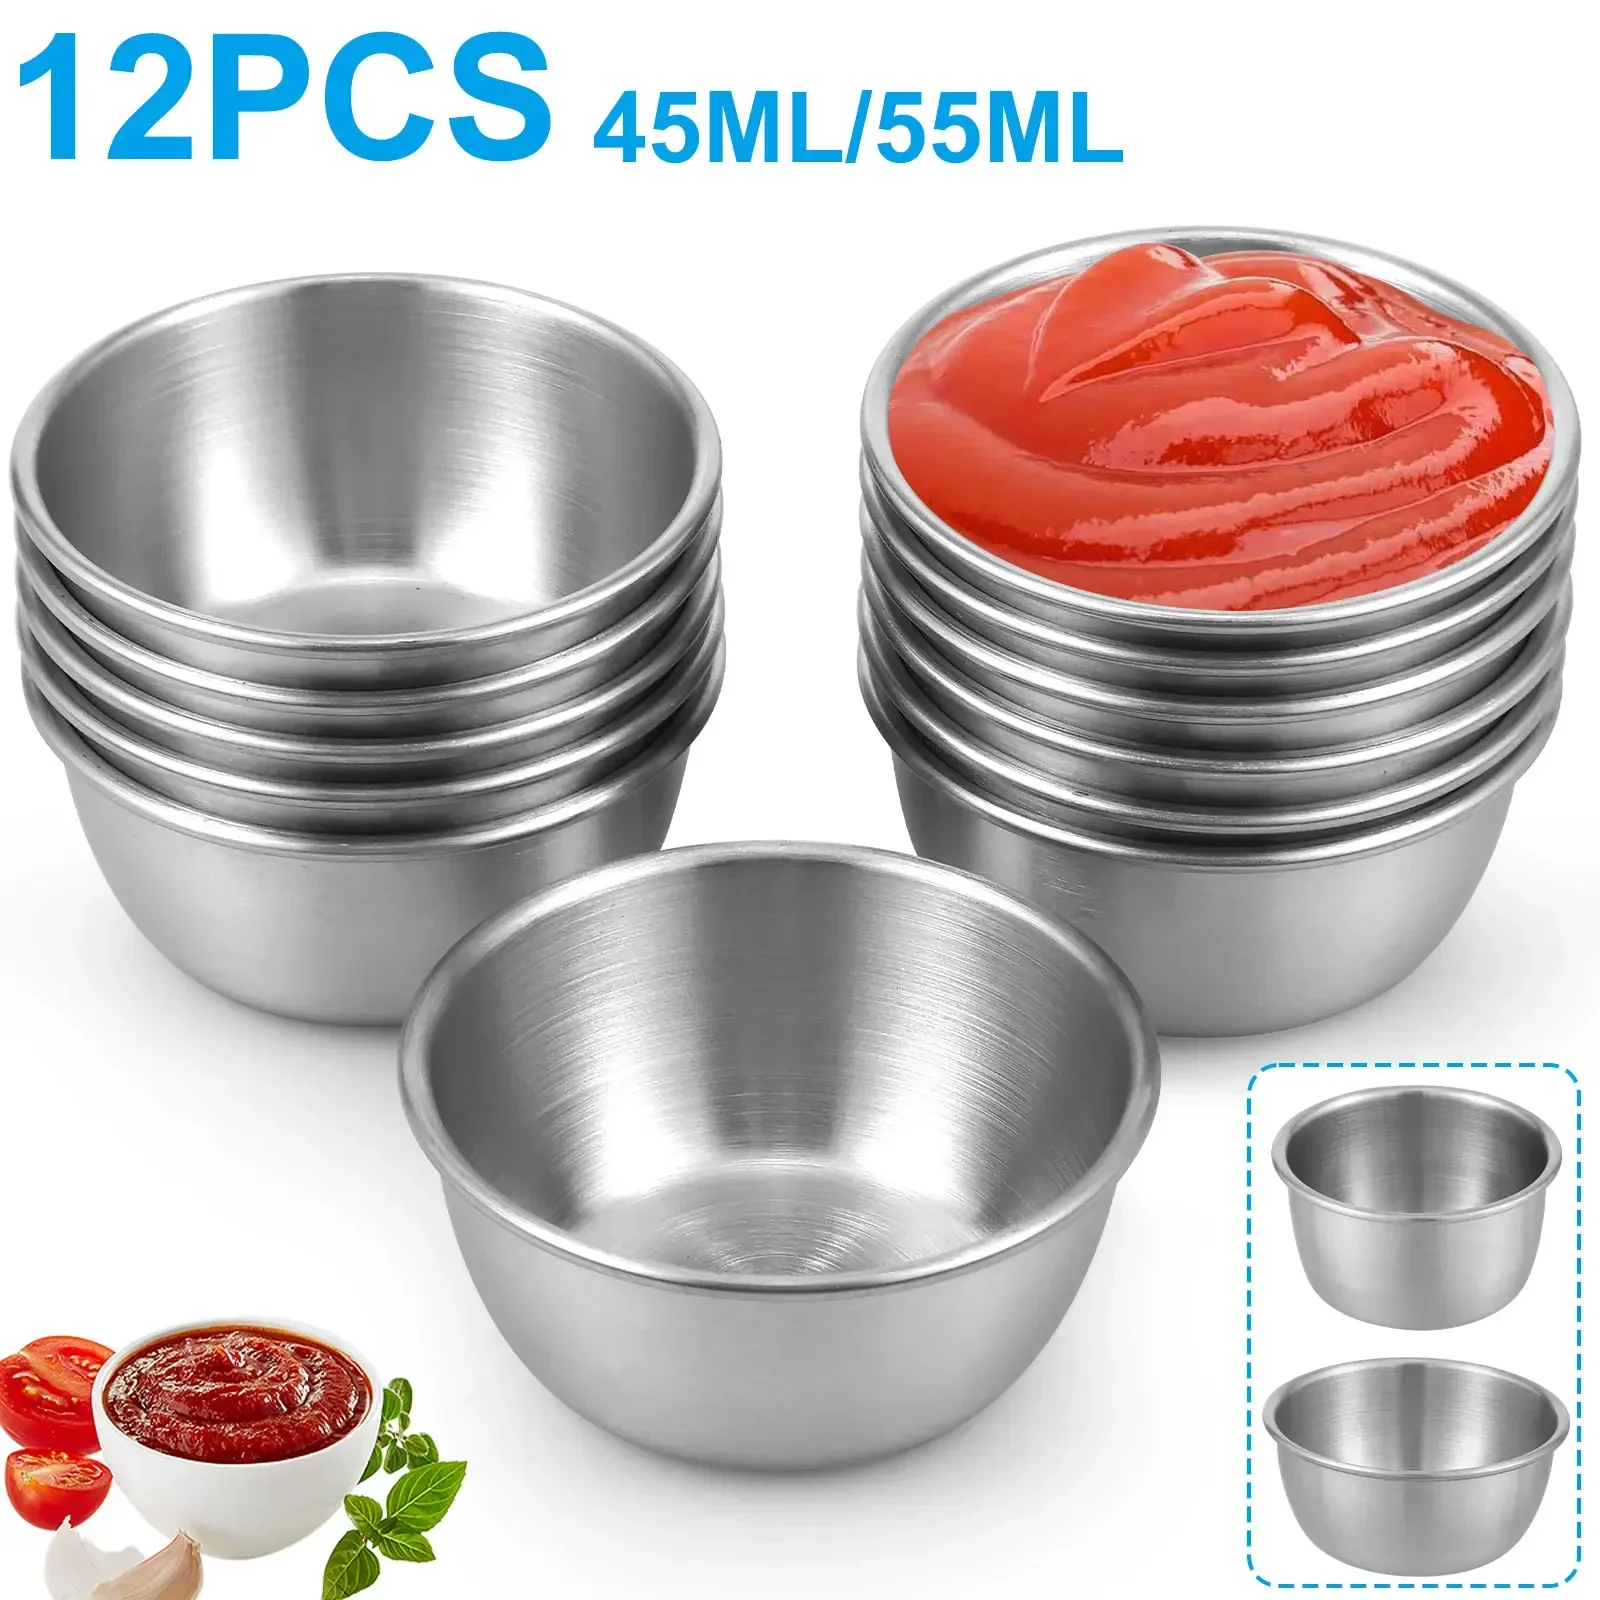 https://ae01.alicdn.com/kf/S2904bfcec7b24070bb10e4d978a33699o/12-Pcs-Sauce-Dipping-Bowl-304-Stainless-Steel-Dipping-Cups-Individual-Round-Sauce-Dishes-45-55ml.jpg